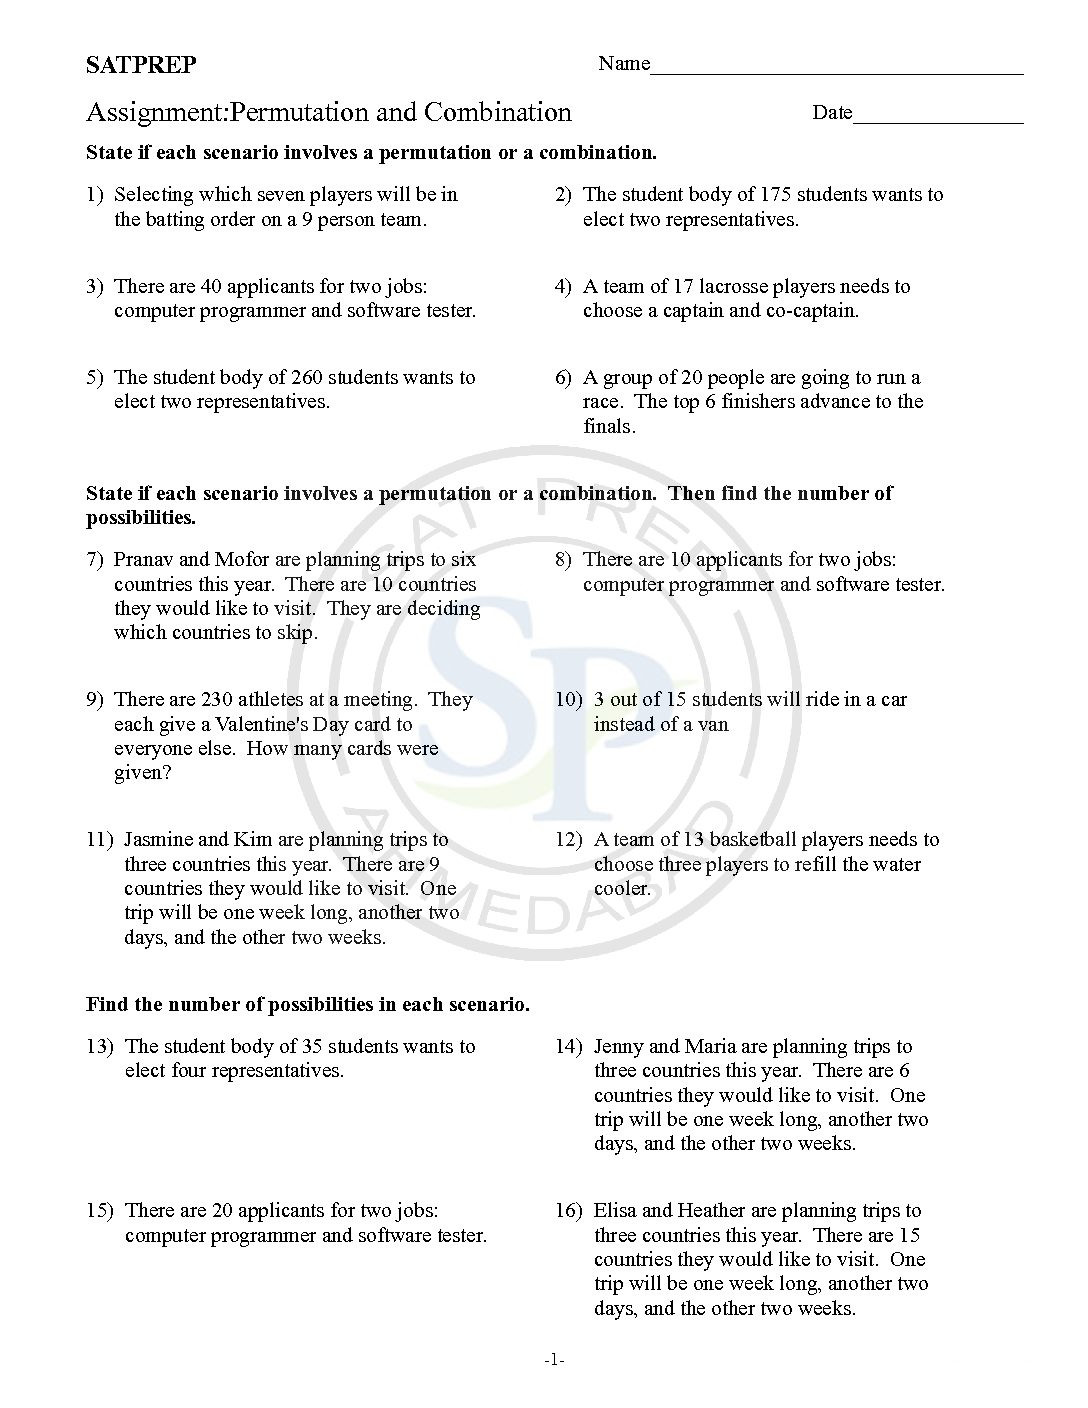 Permutations and Combinations Worksheet Permutation and Bination Archives Sat Prep